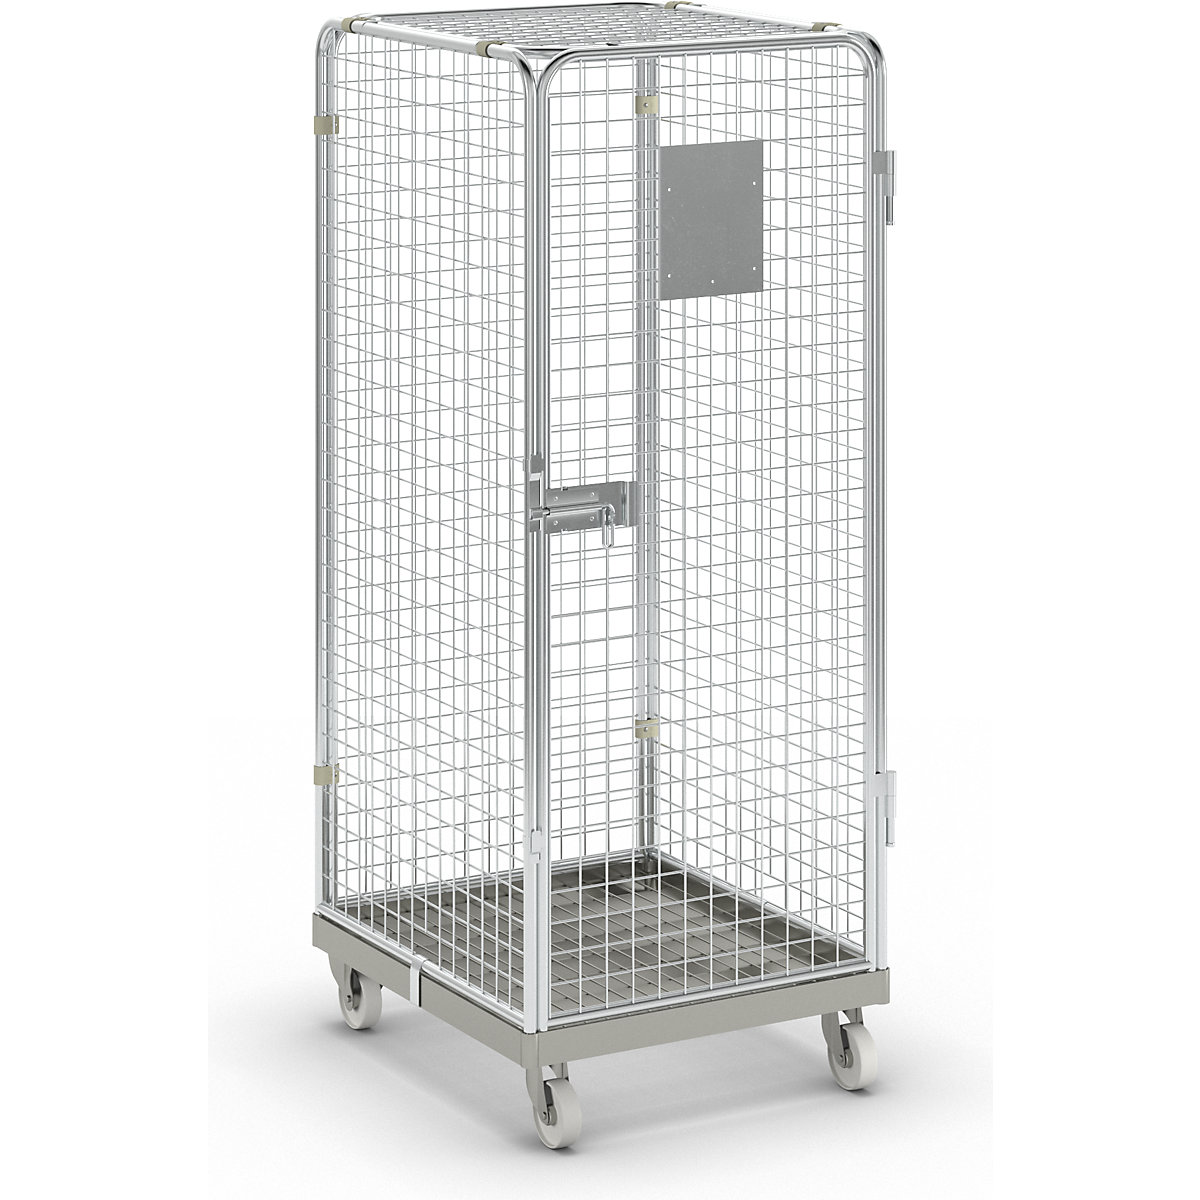 Security steel container with steel dolly, without intermediate shelf, weight 52.9 kg-11